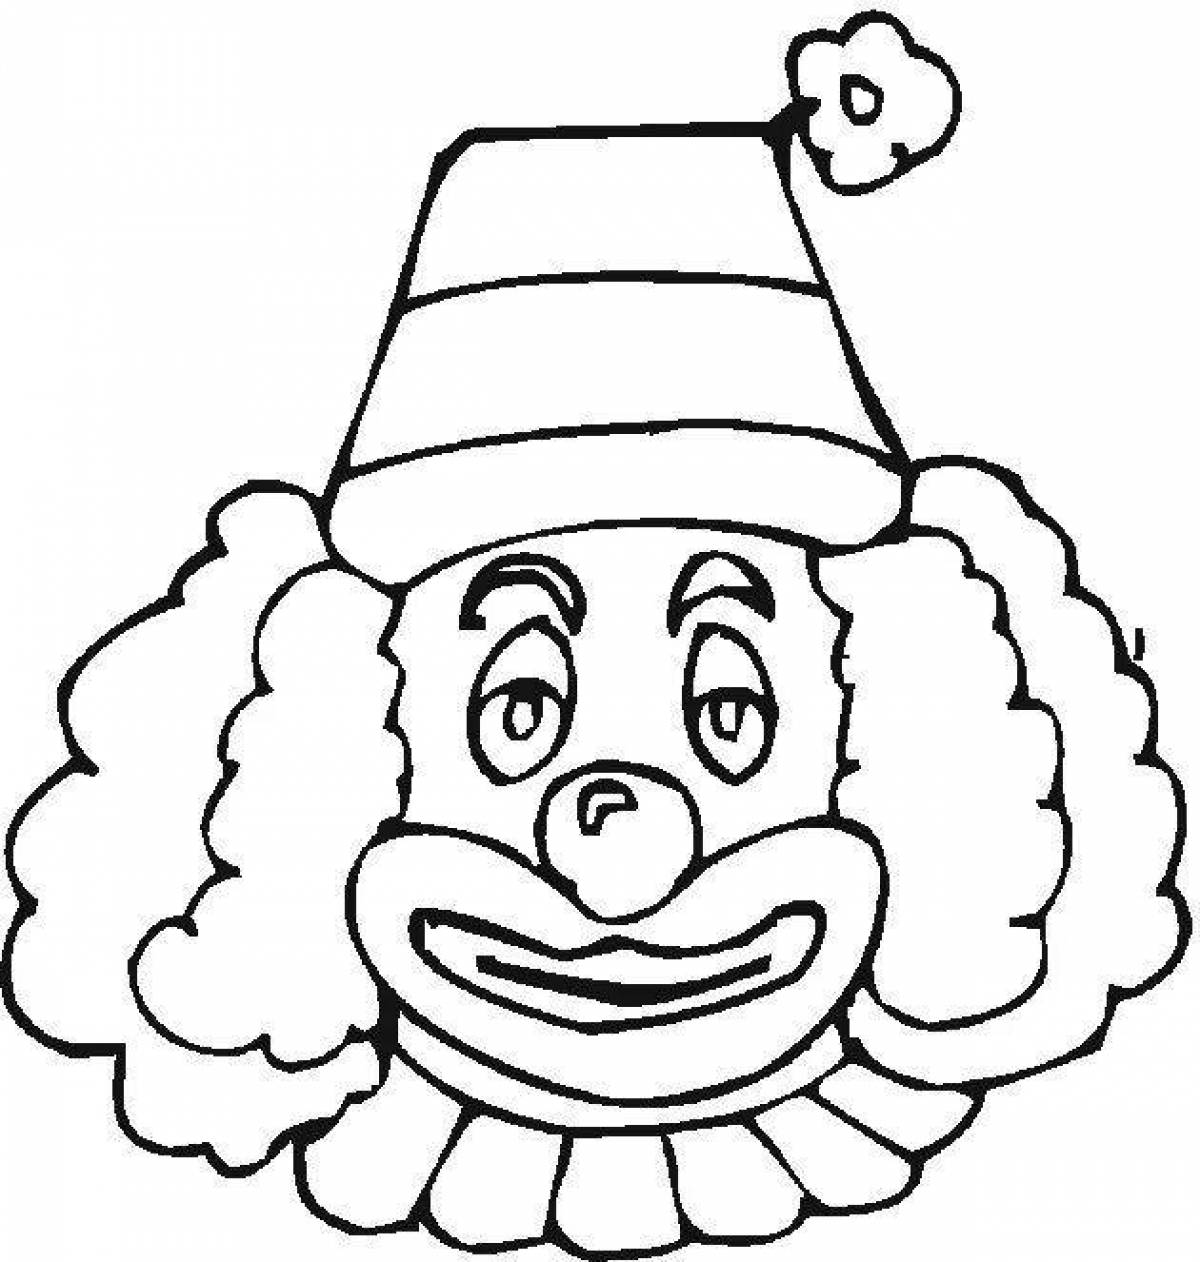 Stupid clown face coloring page